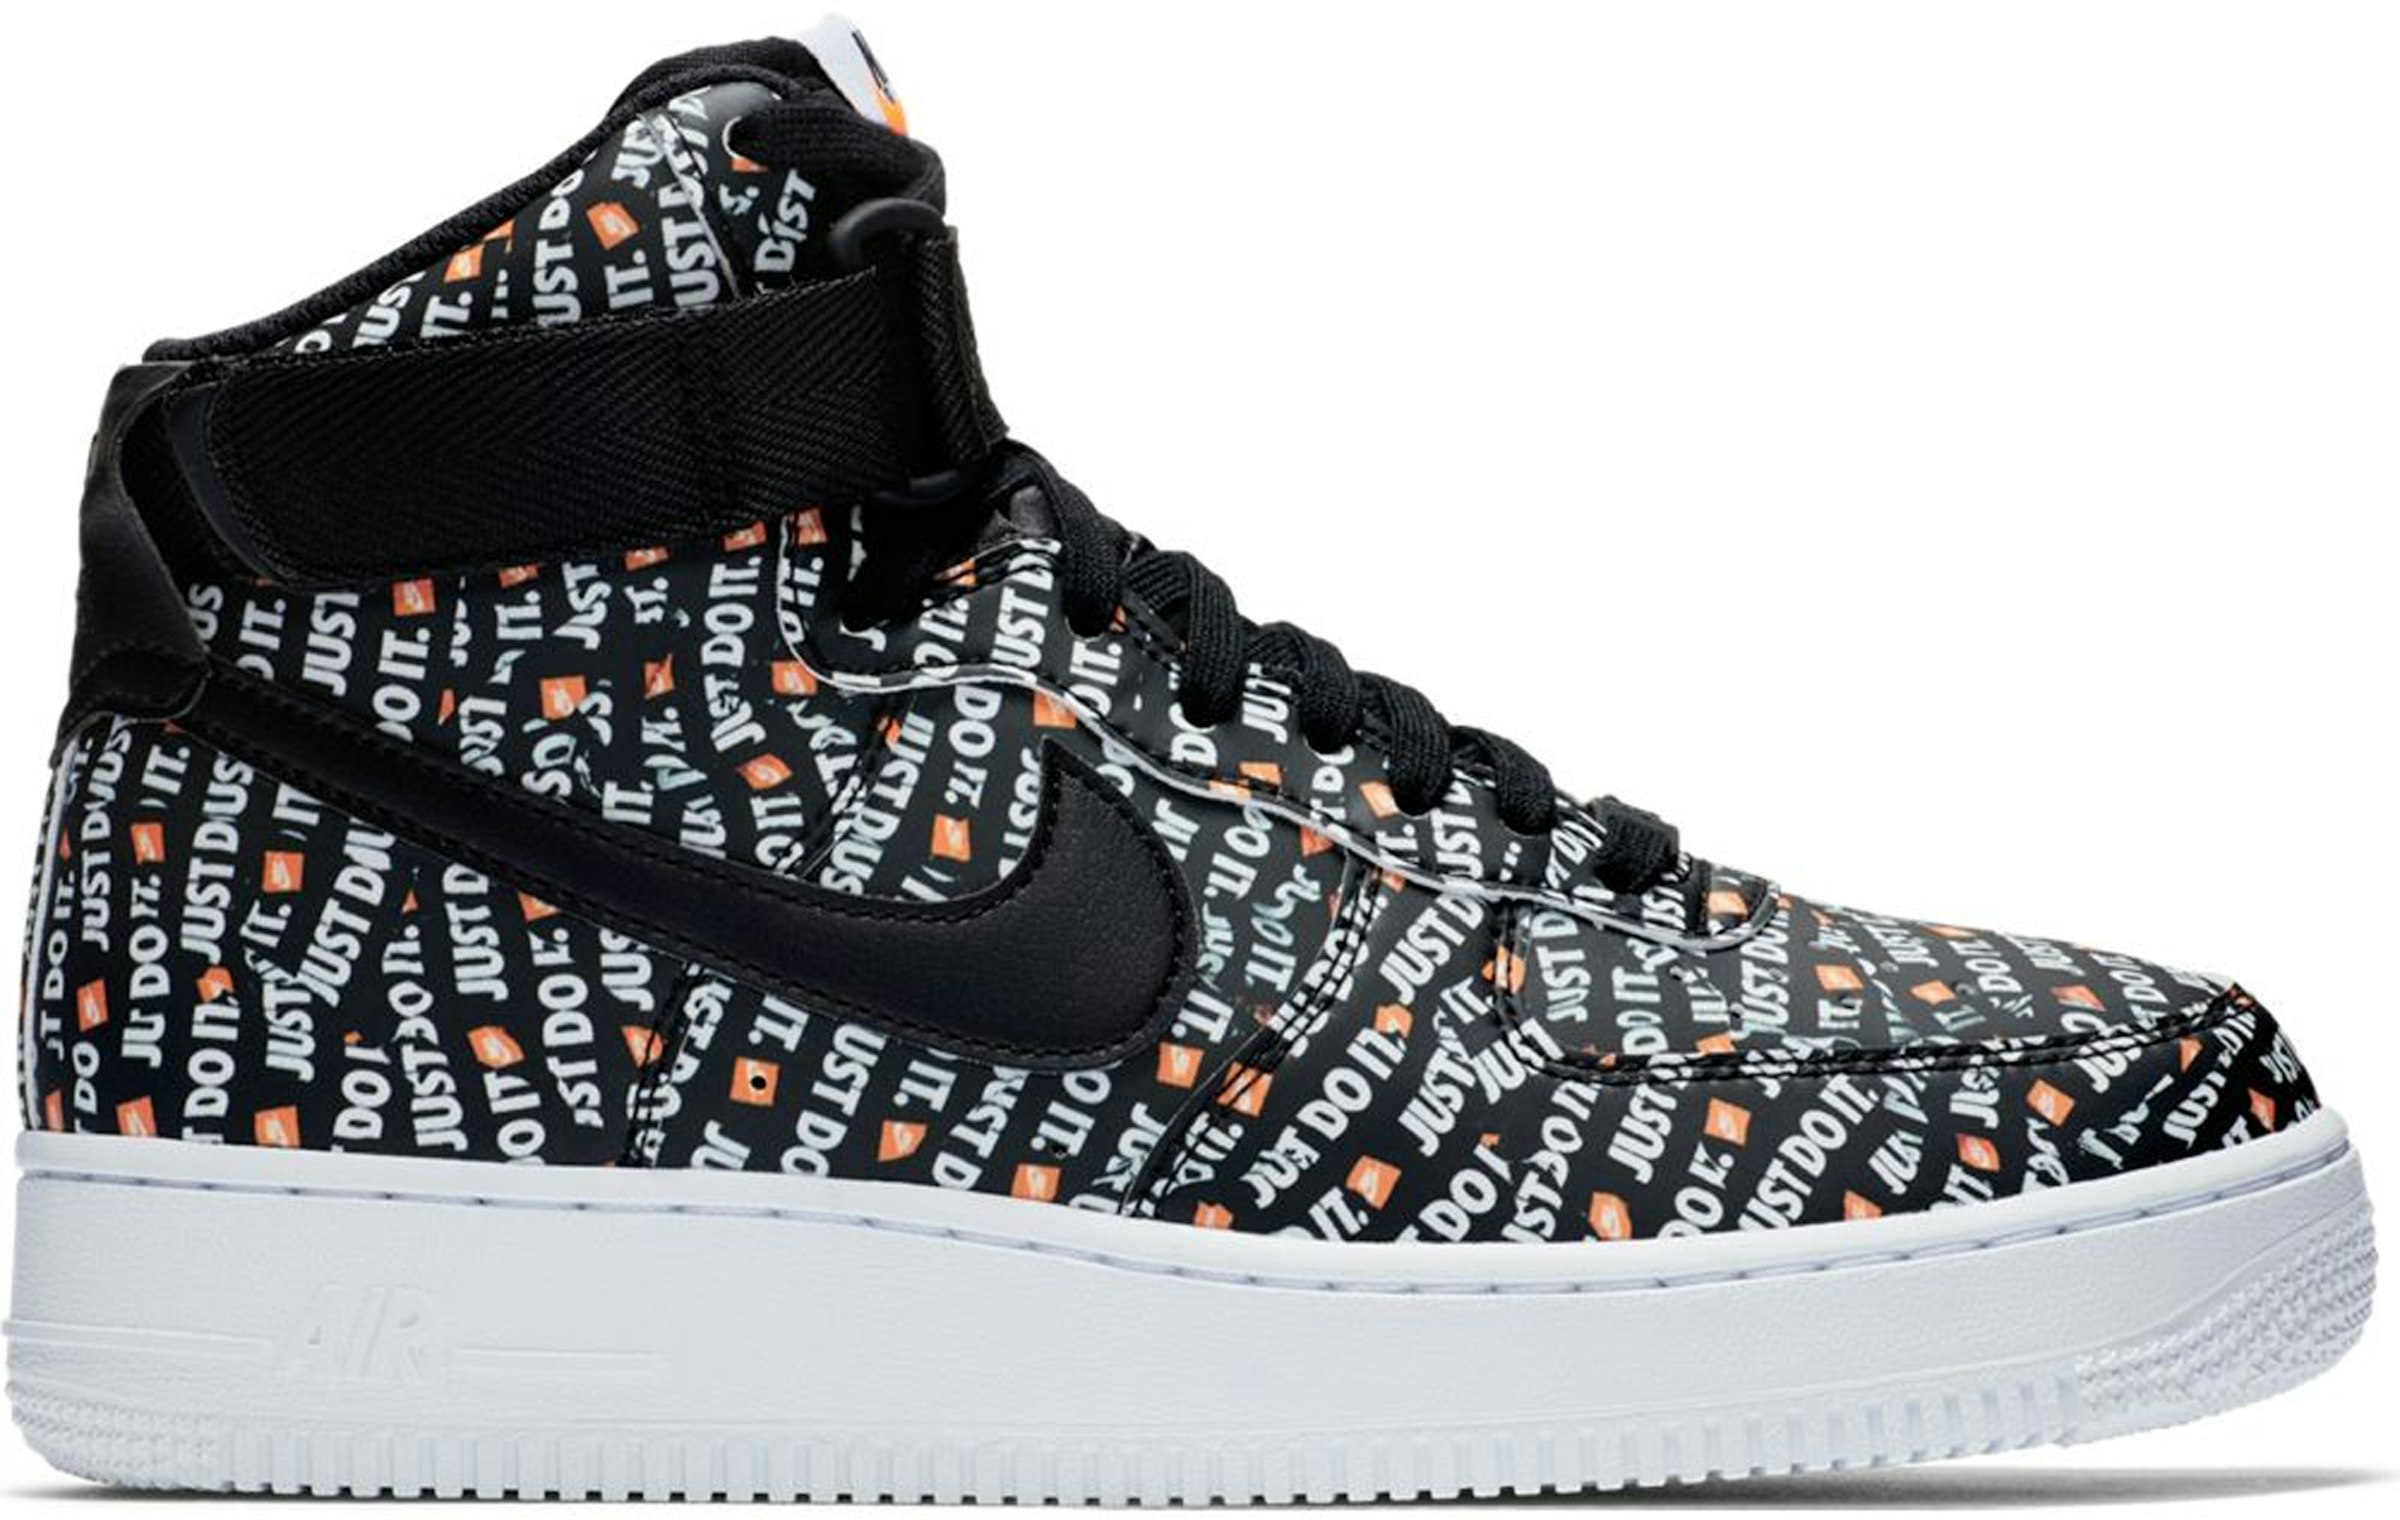 Nike Air Force 1 High Just It Pack Black - AO5138-001 - US